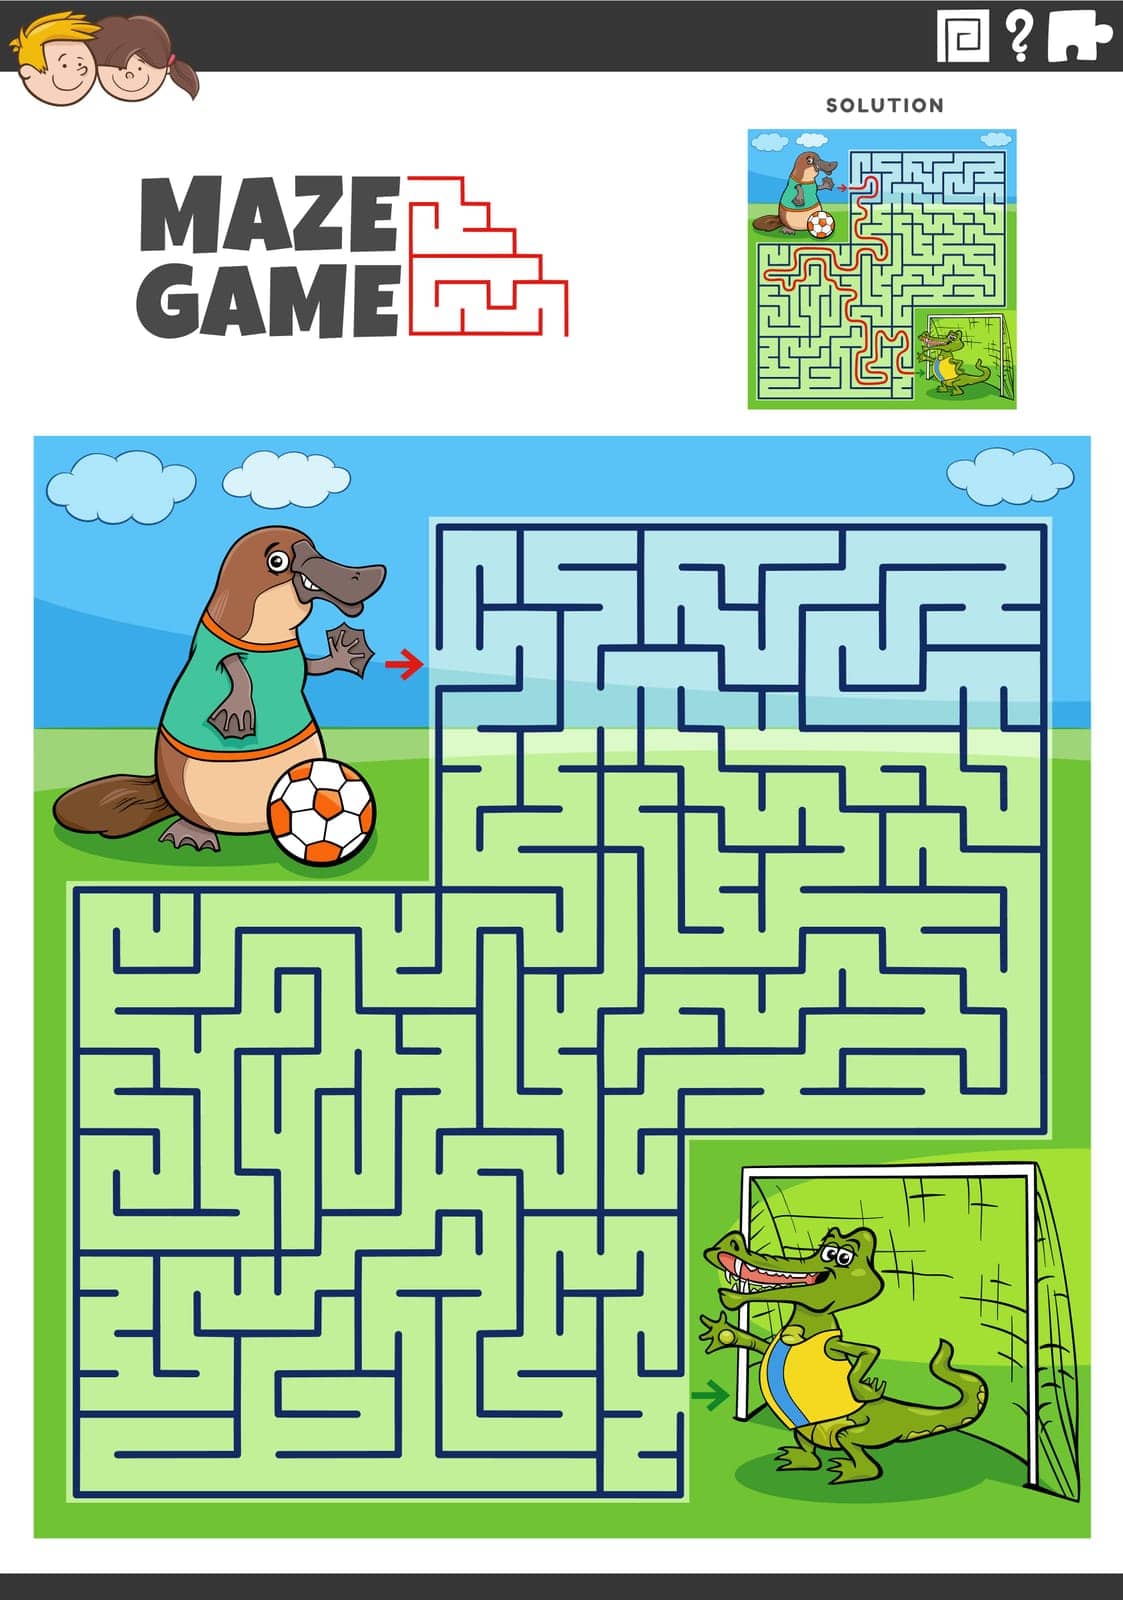 Cartoon illustration of educational maze puzzle activity with animal characters playing soccer